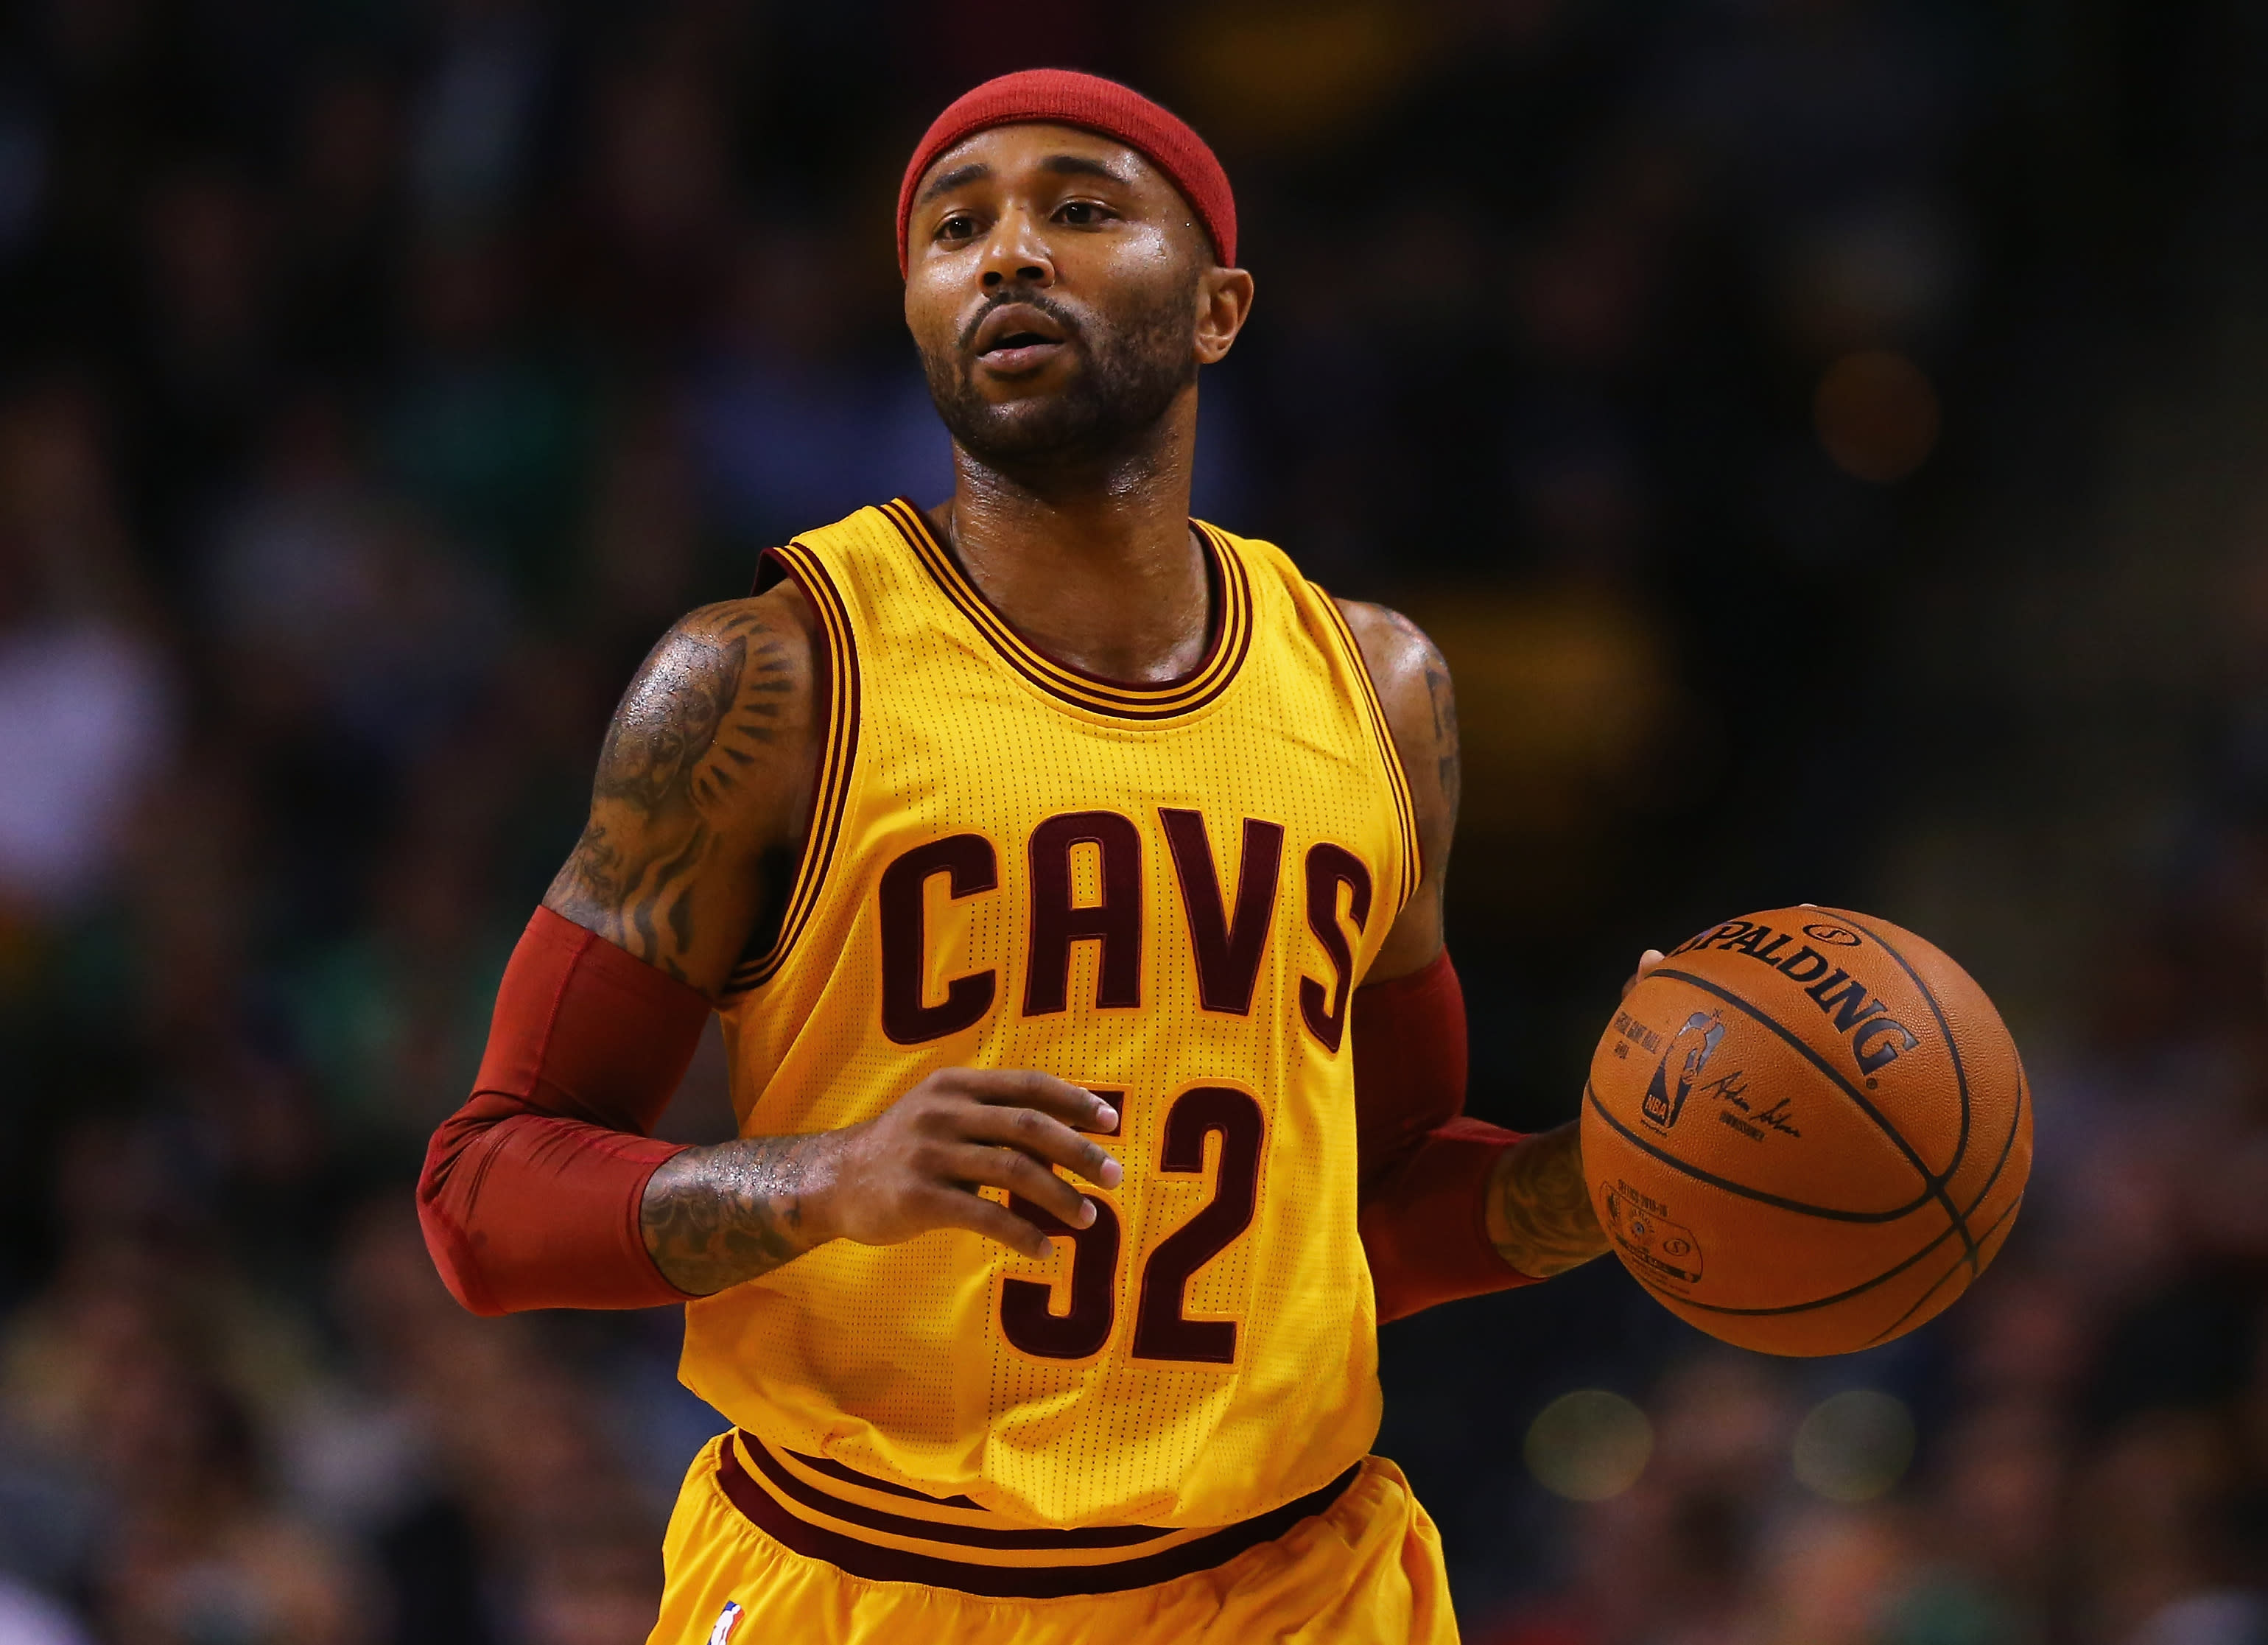 mo williams jersey number